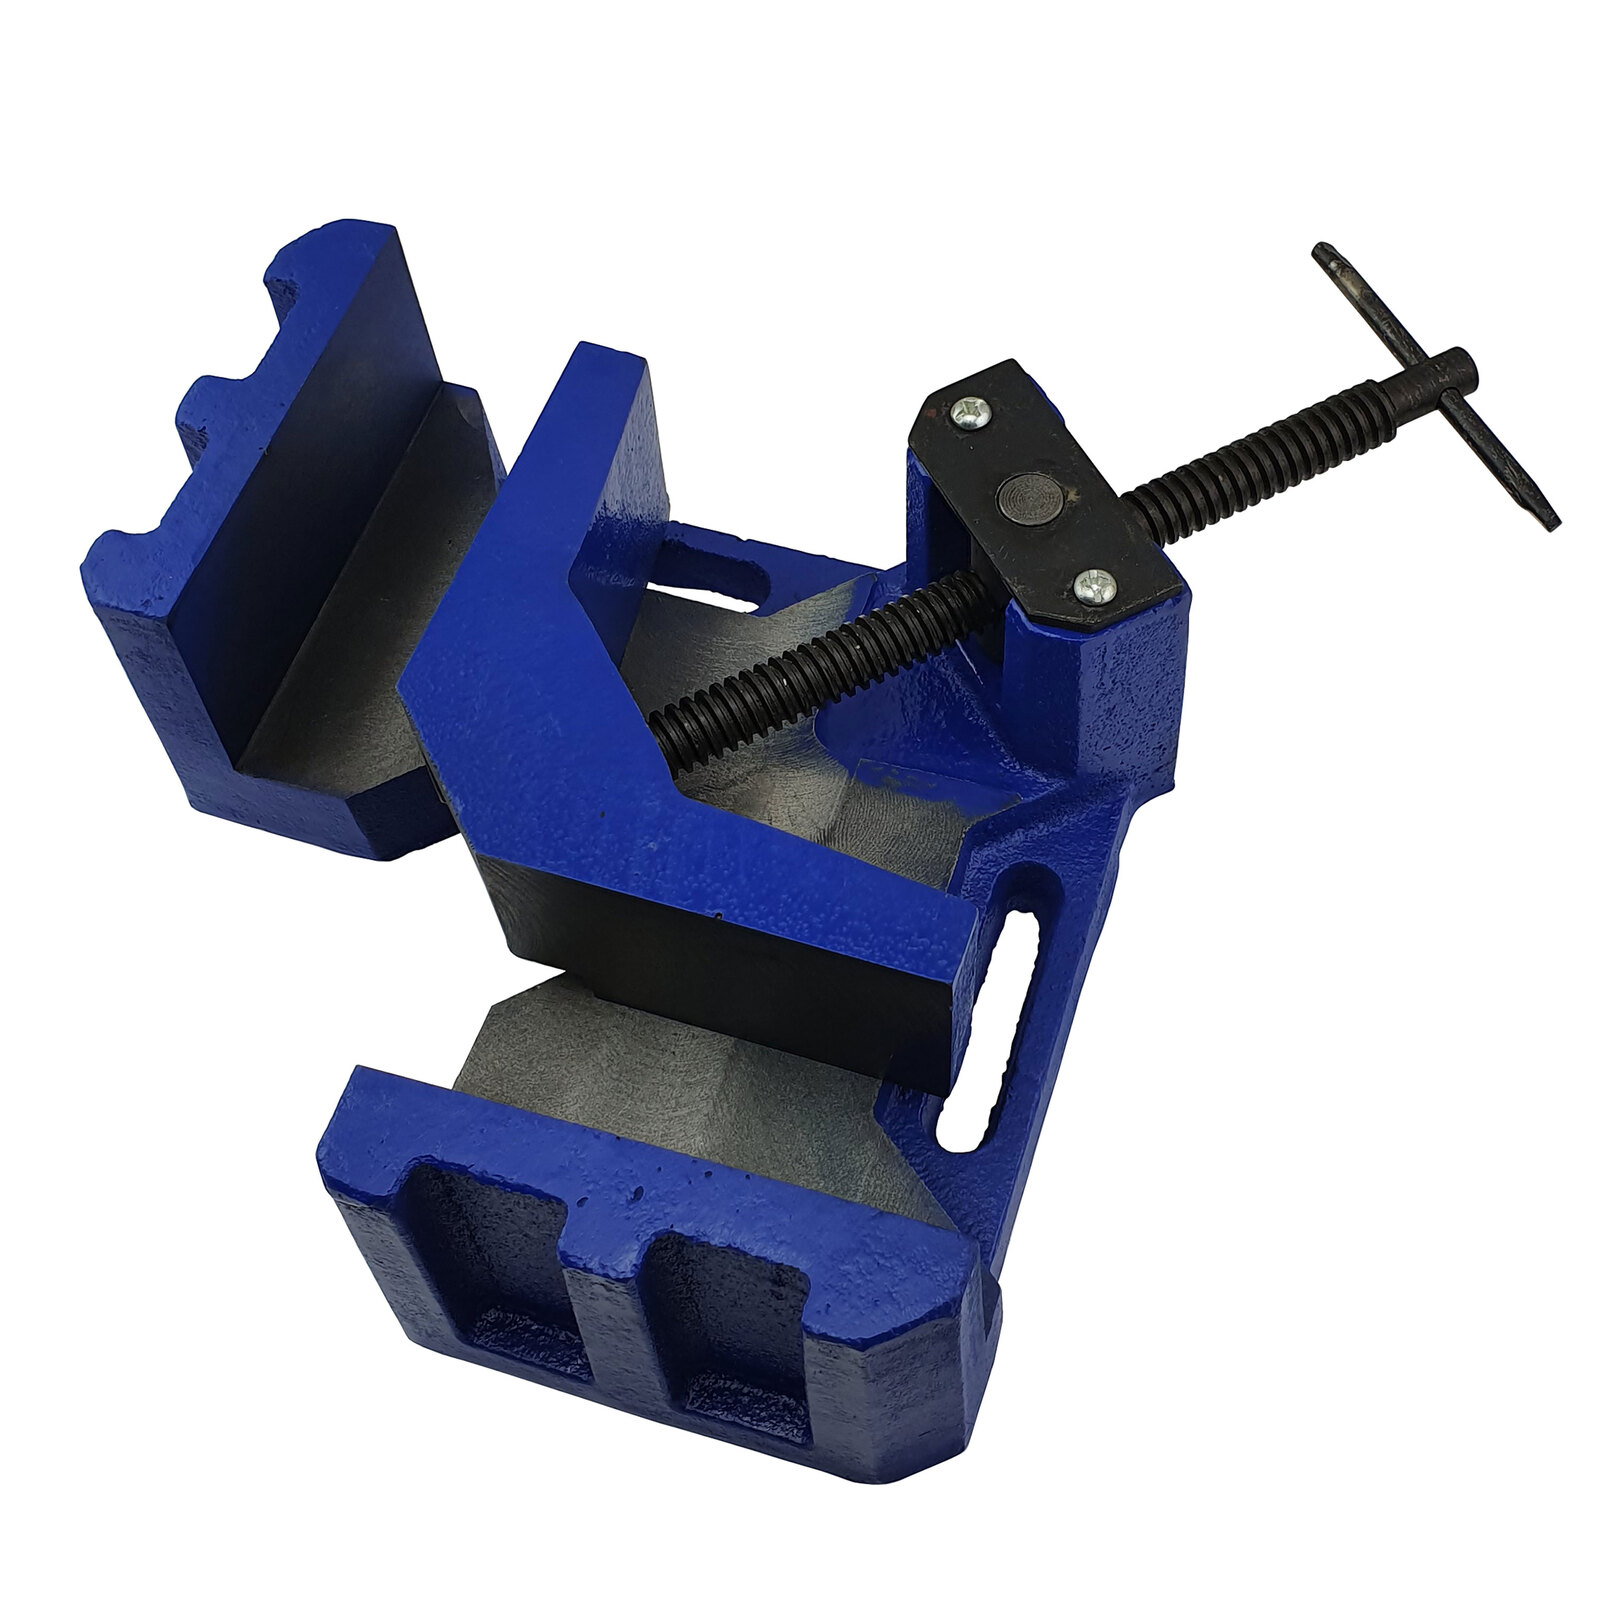 Multi-function Quick-Jaw Right Angle 90 Degree Corner Clamp for Welding Right Angle Clip/Right Angle Clip/Woodworking Right Angle Clip Frame Clip Best Unique Tool Gift for Men 